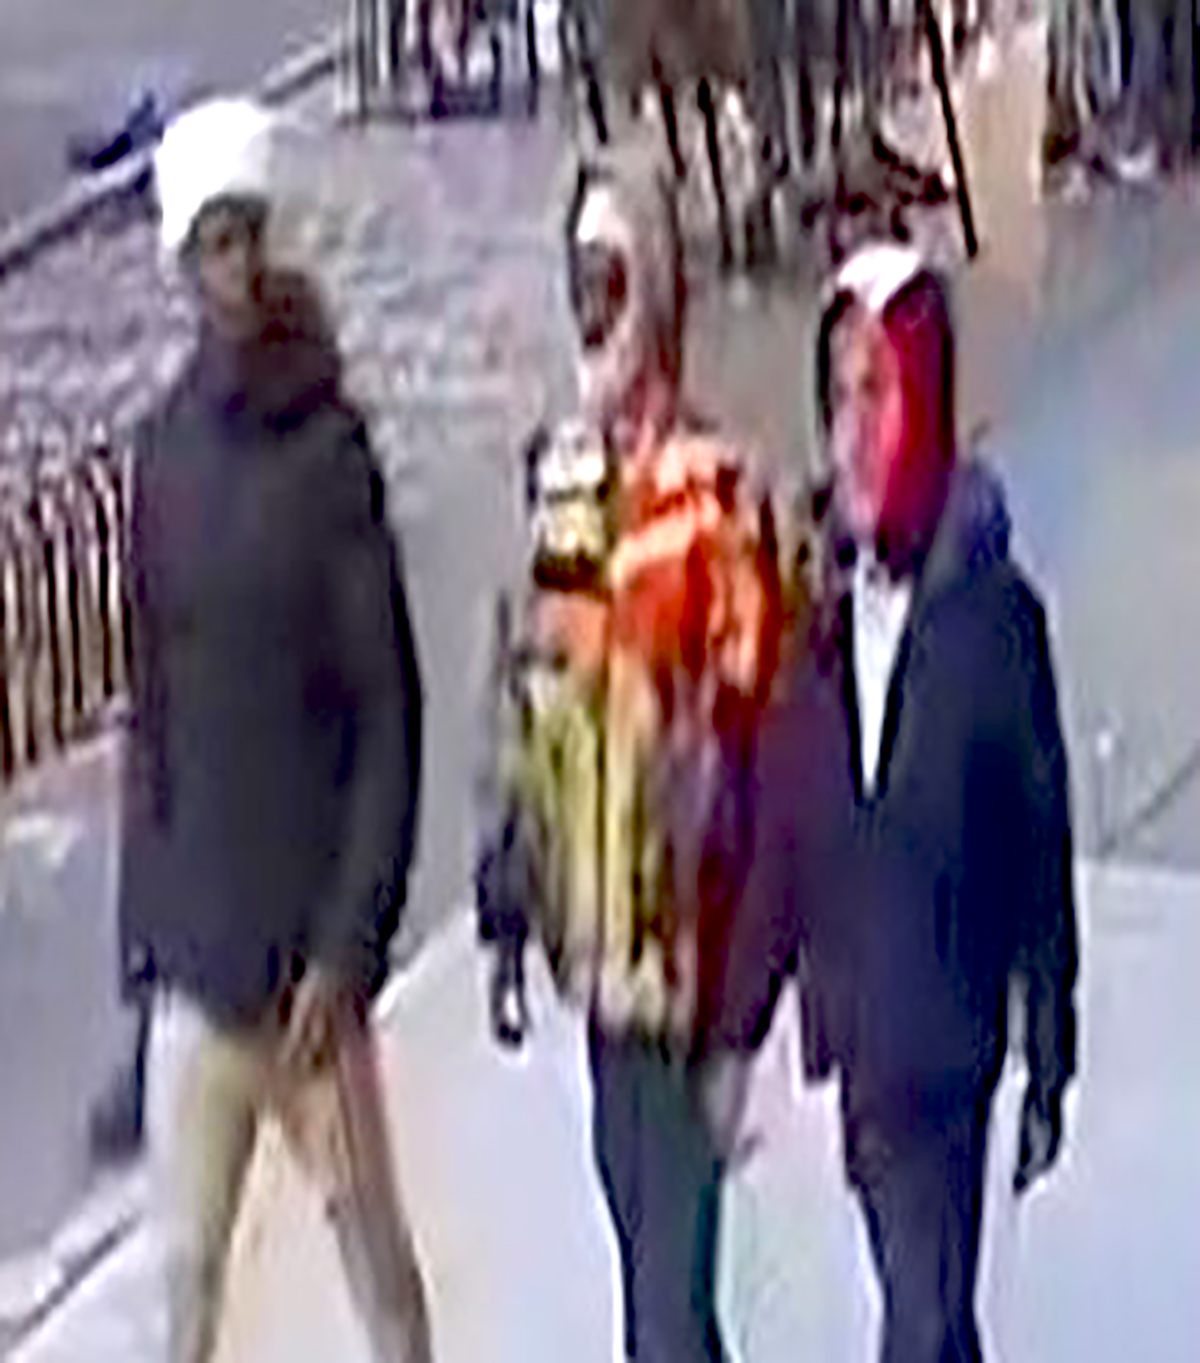 The NYPD is looking for three men wanted in connection with a stabbing on a subway train in Harlem. -Photo by NYPD